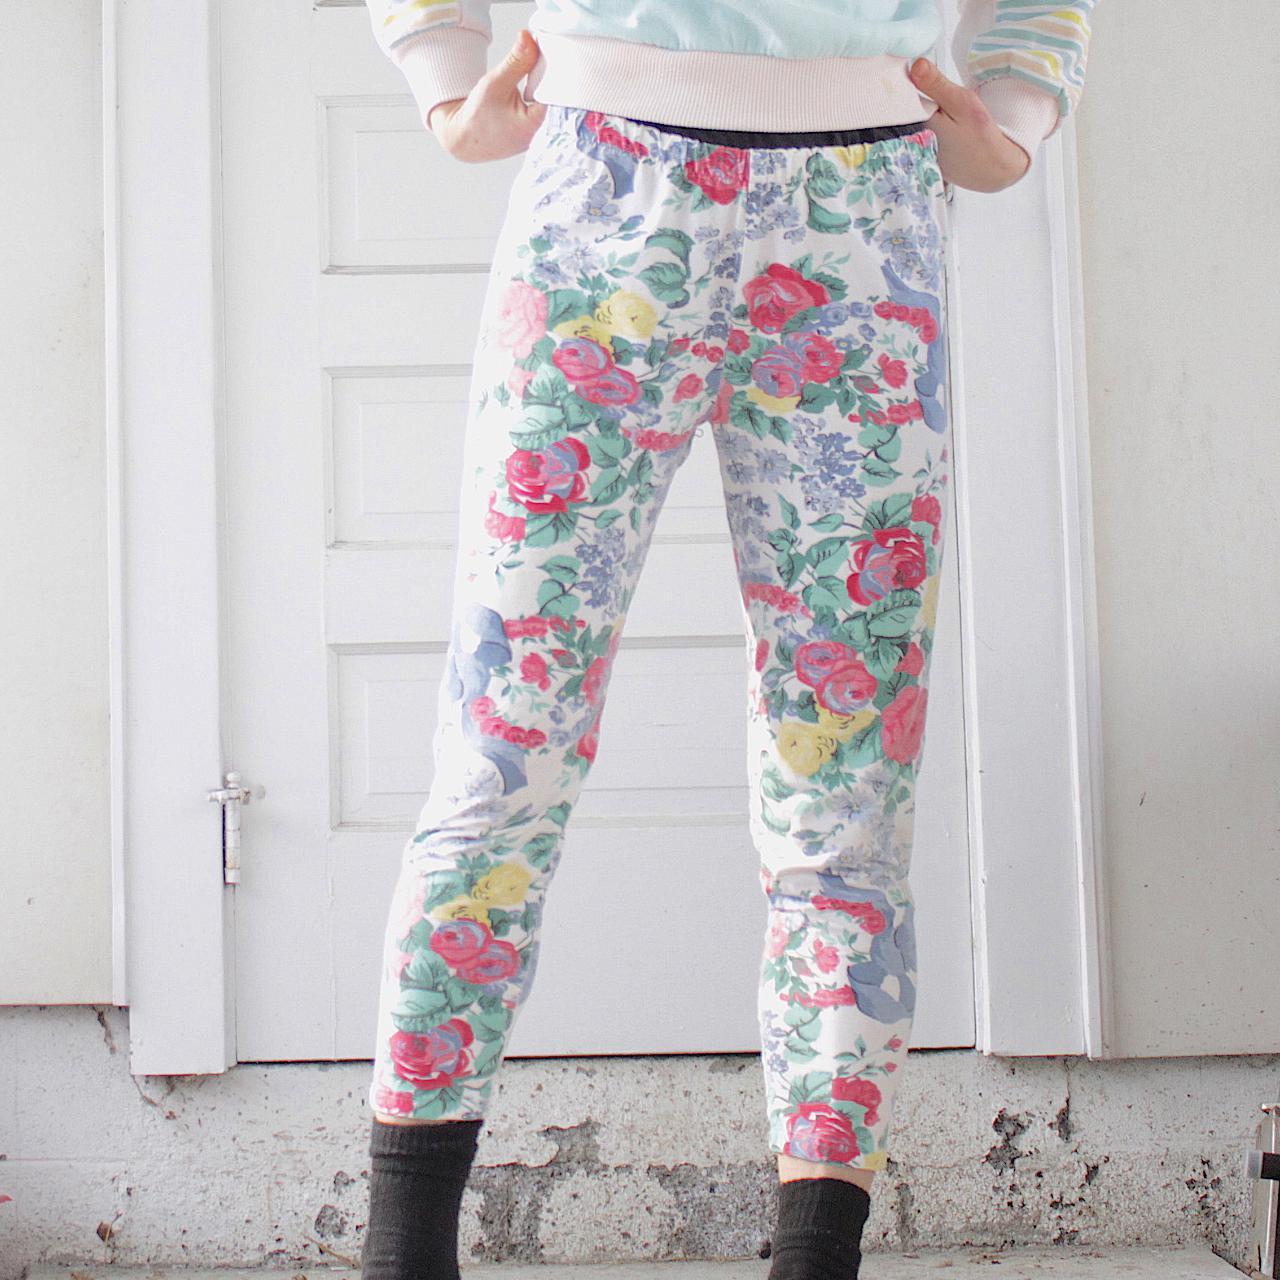 80's Floral Leggings with Skirt